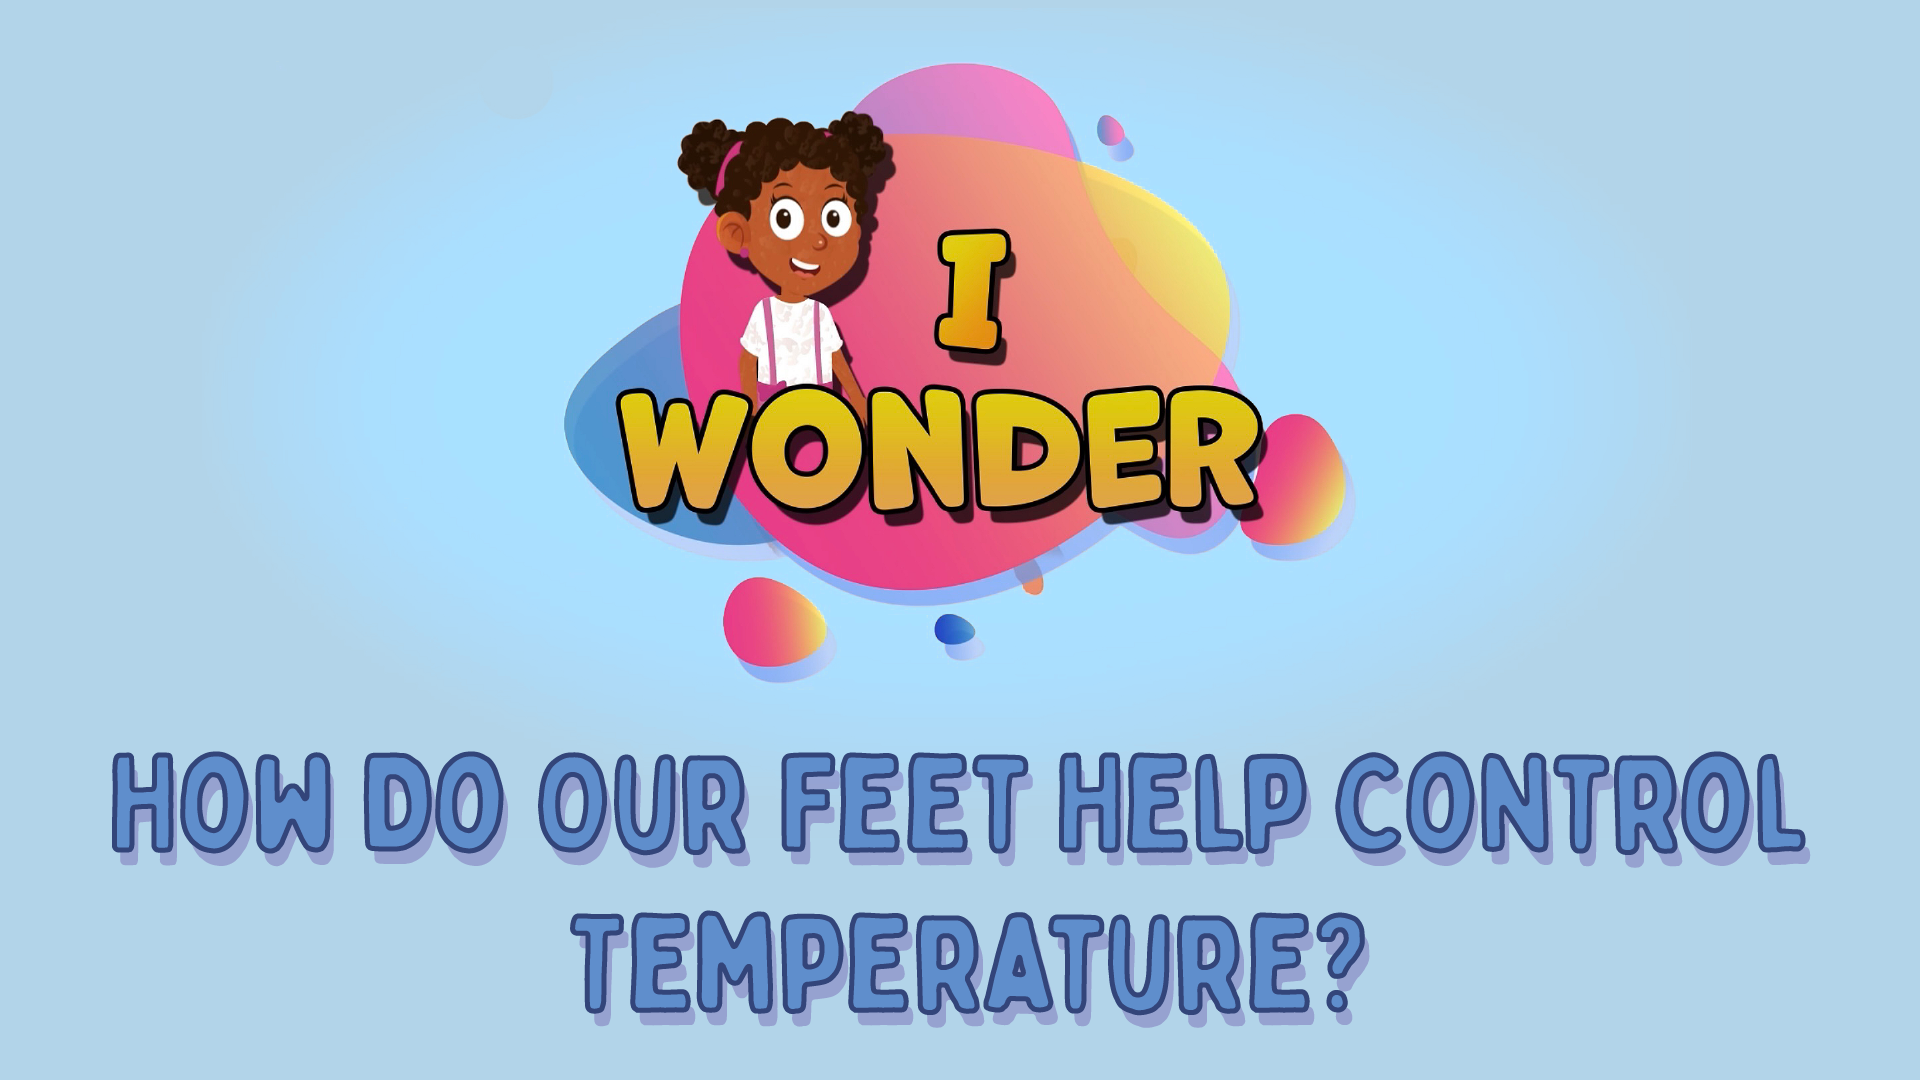 How Do Our Feet Help Control Temperature?